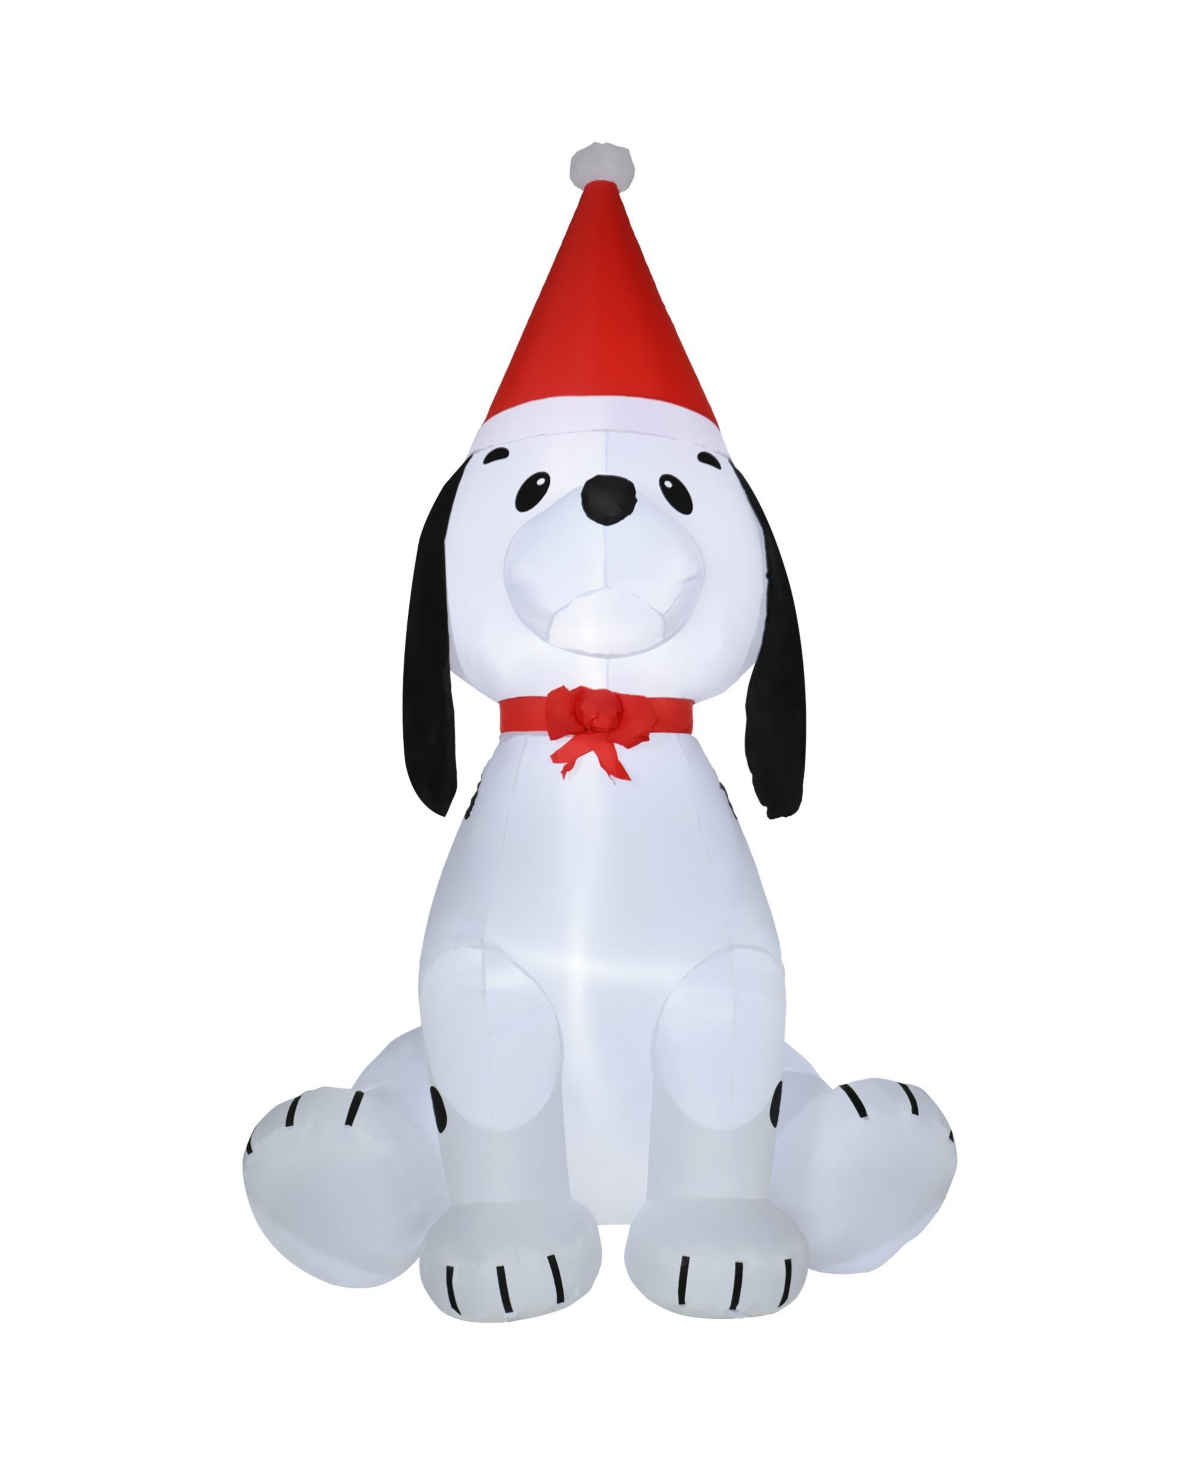 6' Christmas Inflatable Puppy Dog Outdoor Blow-Up Display - White